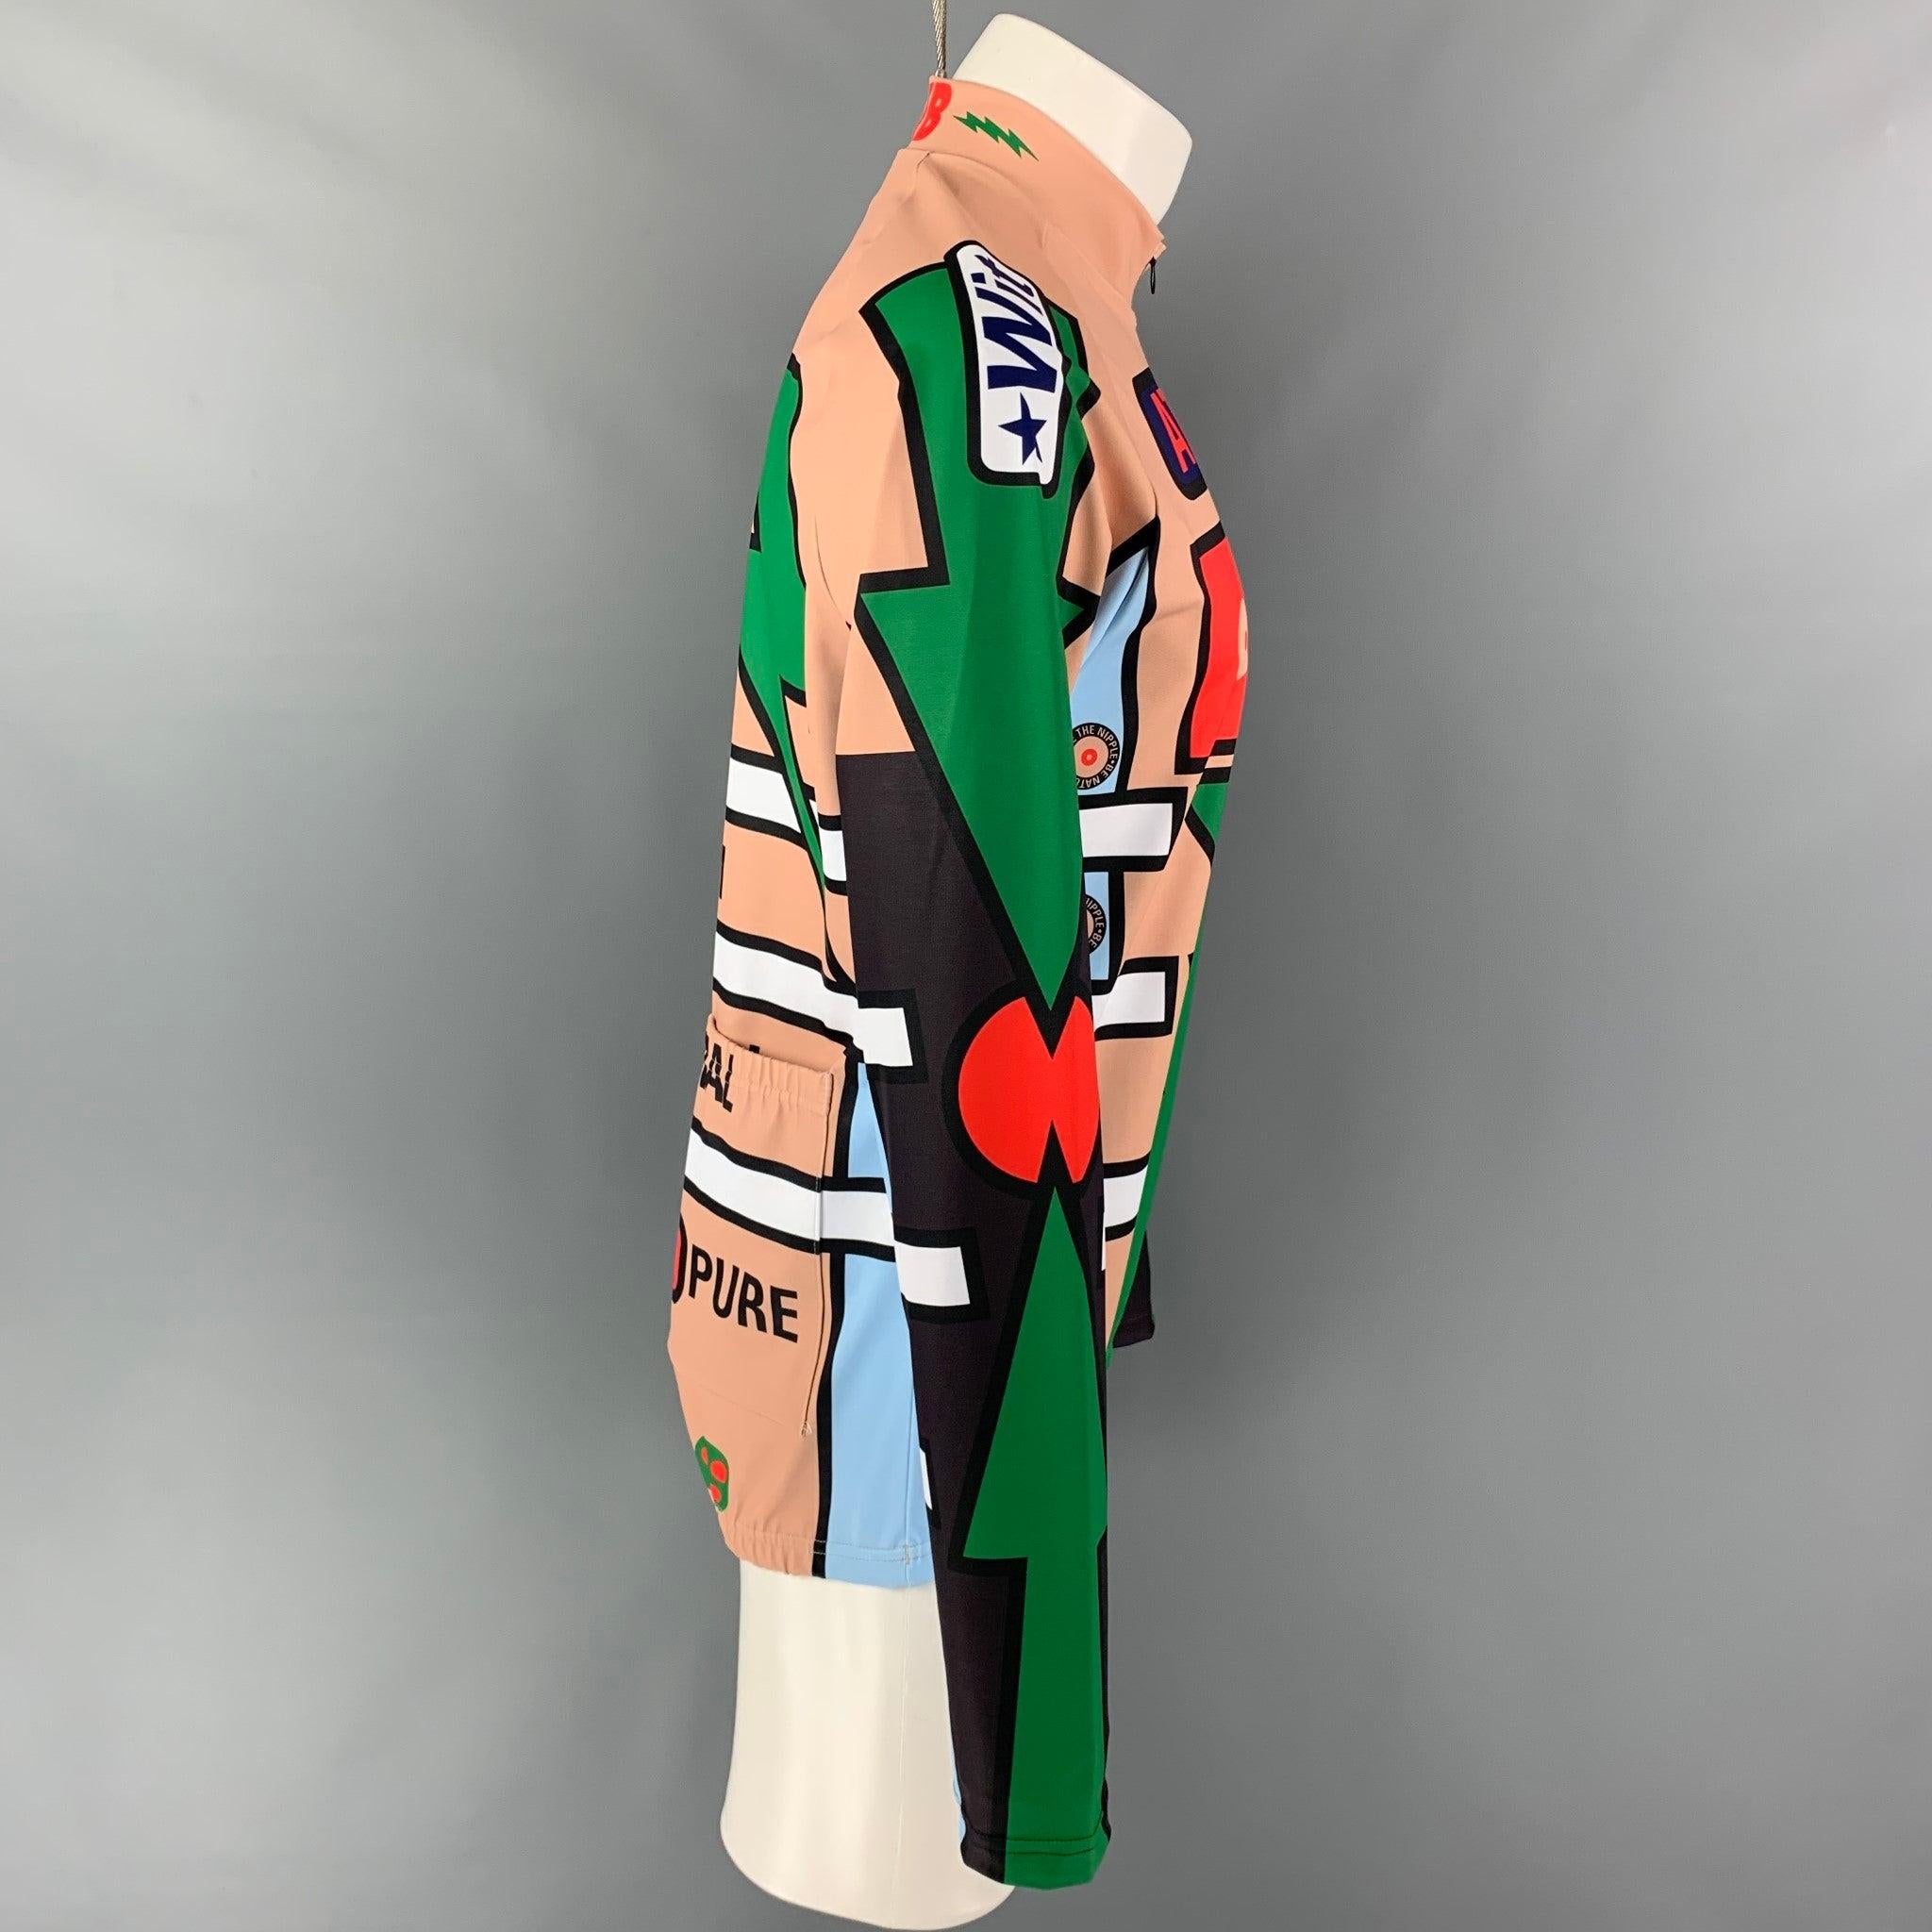 Walter Van Beirendonck Cycle Biker Jersey Pullover Top from Spring Summer 2020 witblitz collection. Features a stretch material quarter zip graphic print design, collar and back pockets. With detachable sleeves to make it a short sleeve